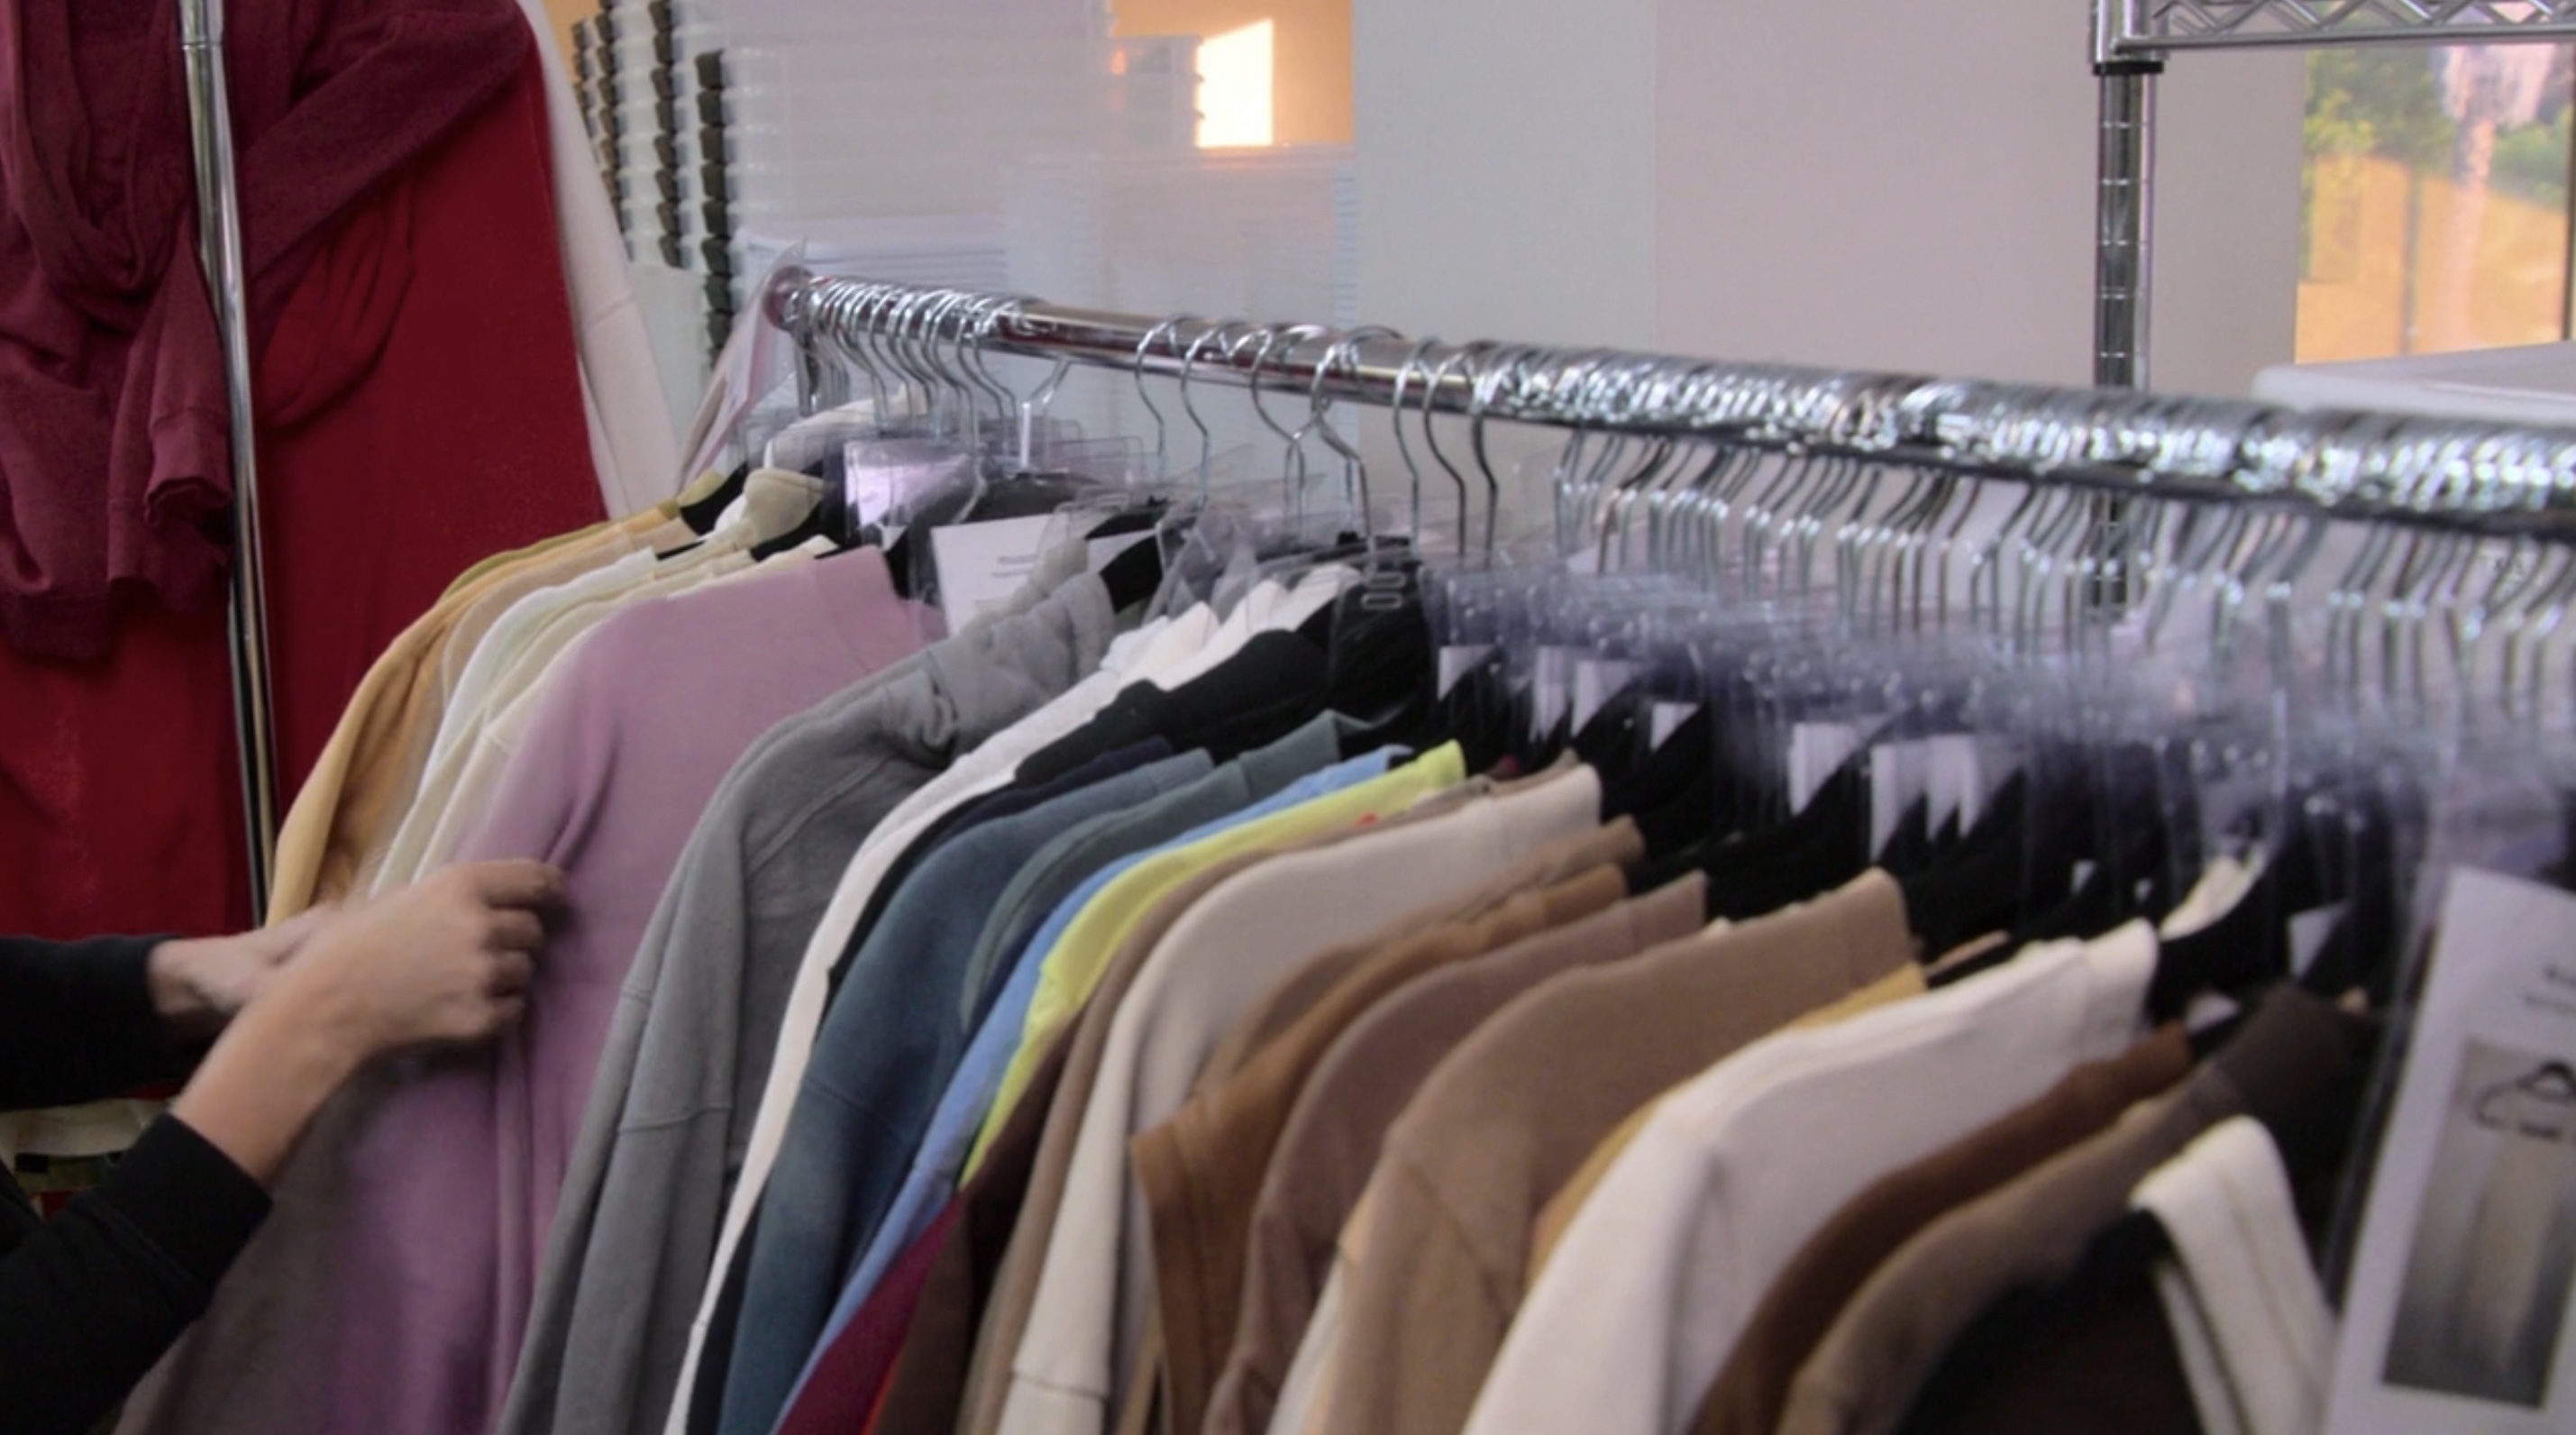 A rack of clothing